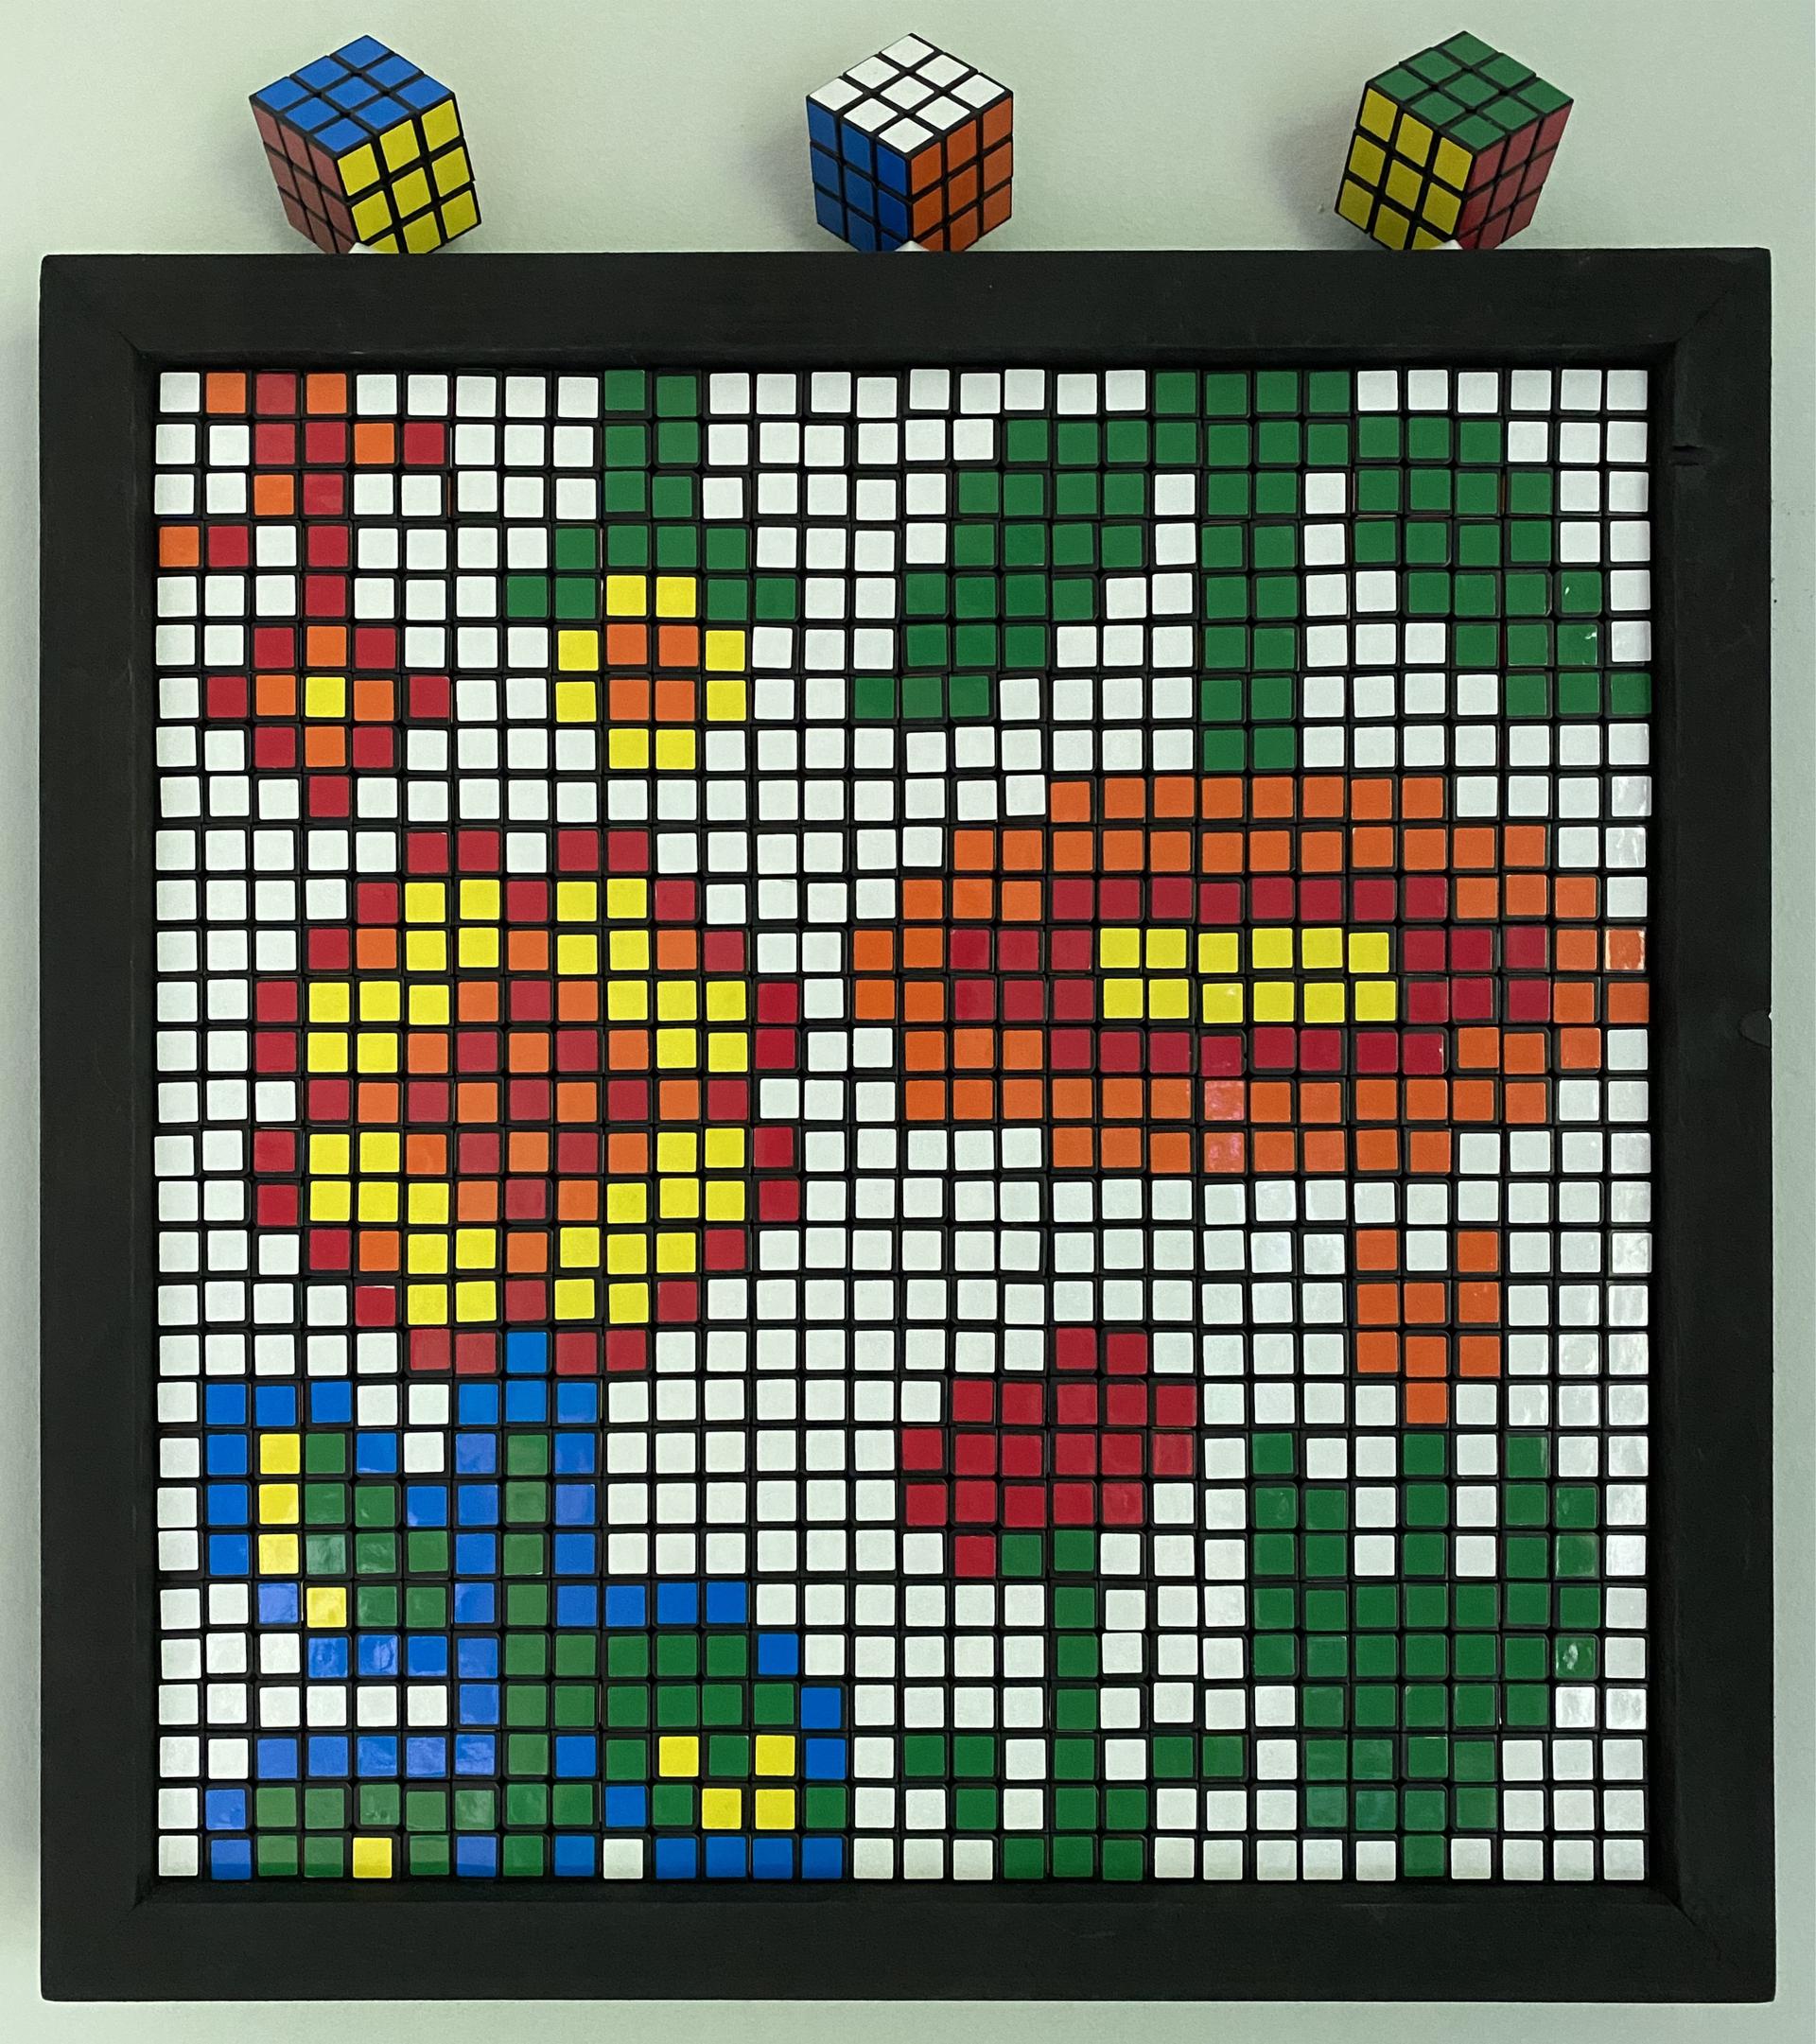 Rubik's cubes as pixel art of 6 flowers from Super Mario Bros, Minecraft, Terraria, and Stardew Valley.